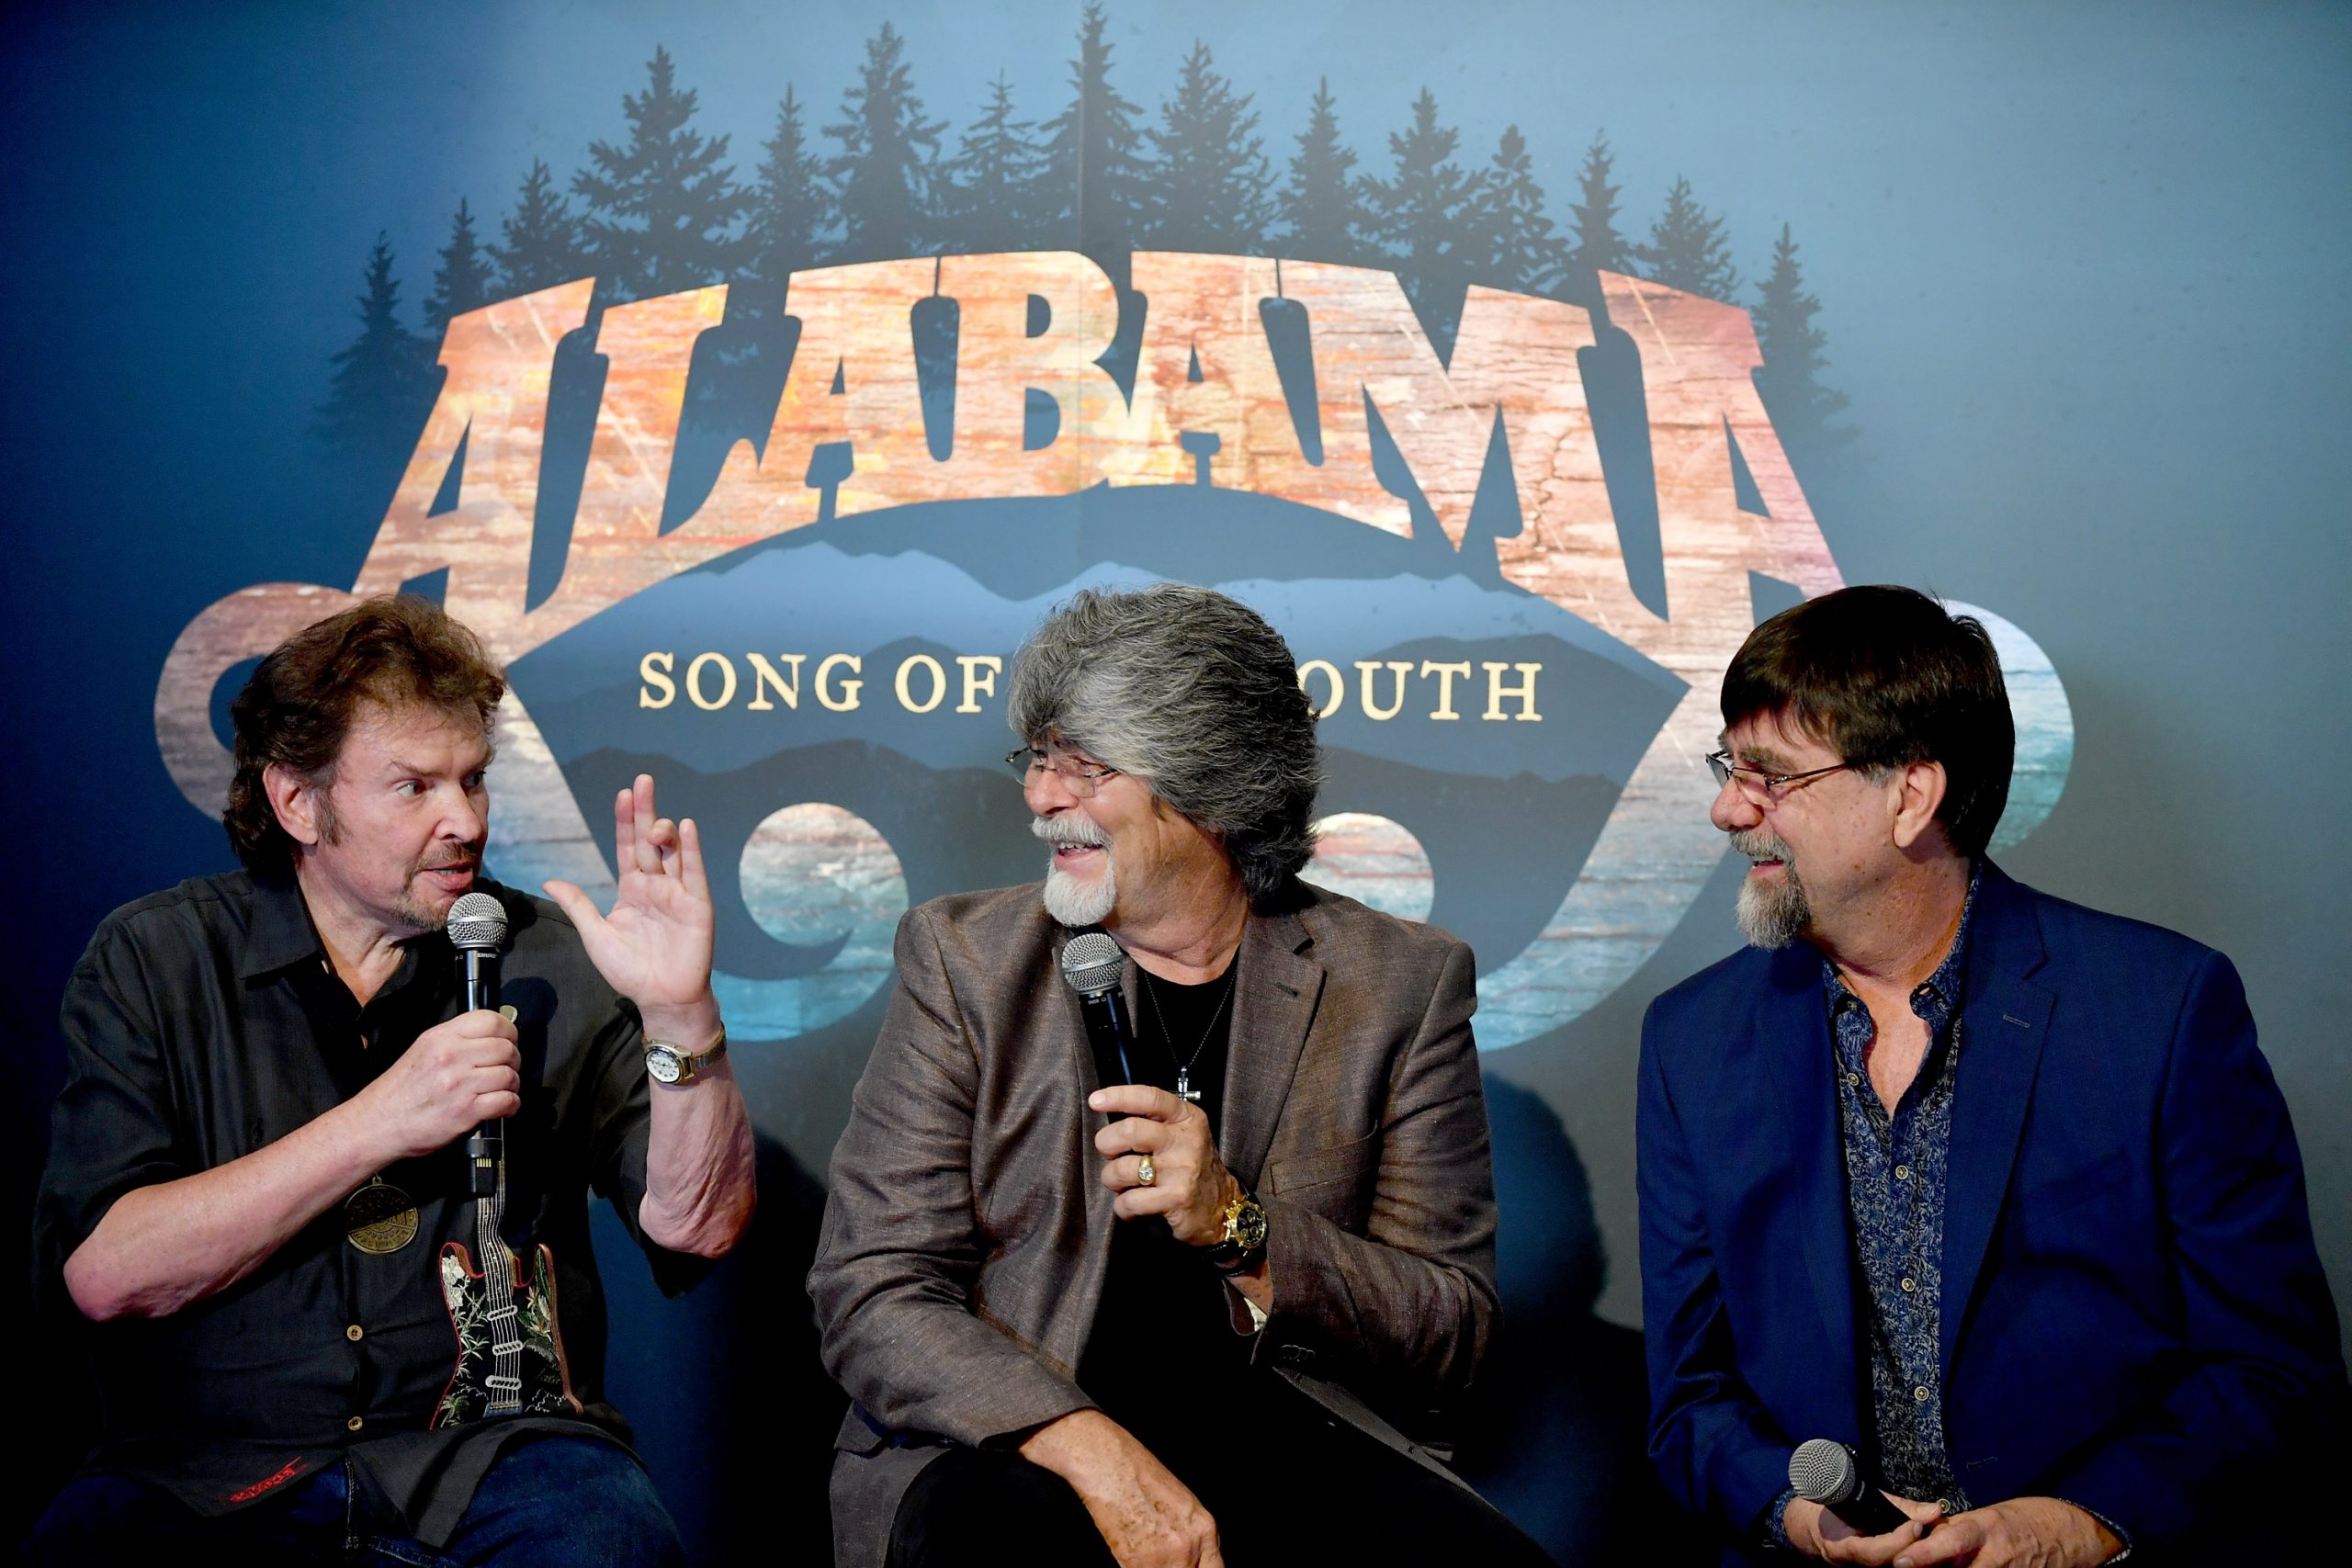 NASHVILLE, TN - AUGUST 22:  (L-R) Jeff Cook, Randy Owen, and Teddy Gentry of the band Alabama speak during the debut of the "Alabama: Song of the South" exhibition at Country Music Hall of Fame and Museum on August 22, 2016 in Nashville, Tennessee.  (Photo by Jason Davis/Getty Images for Country Music Hall of Fame & Museum)